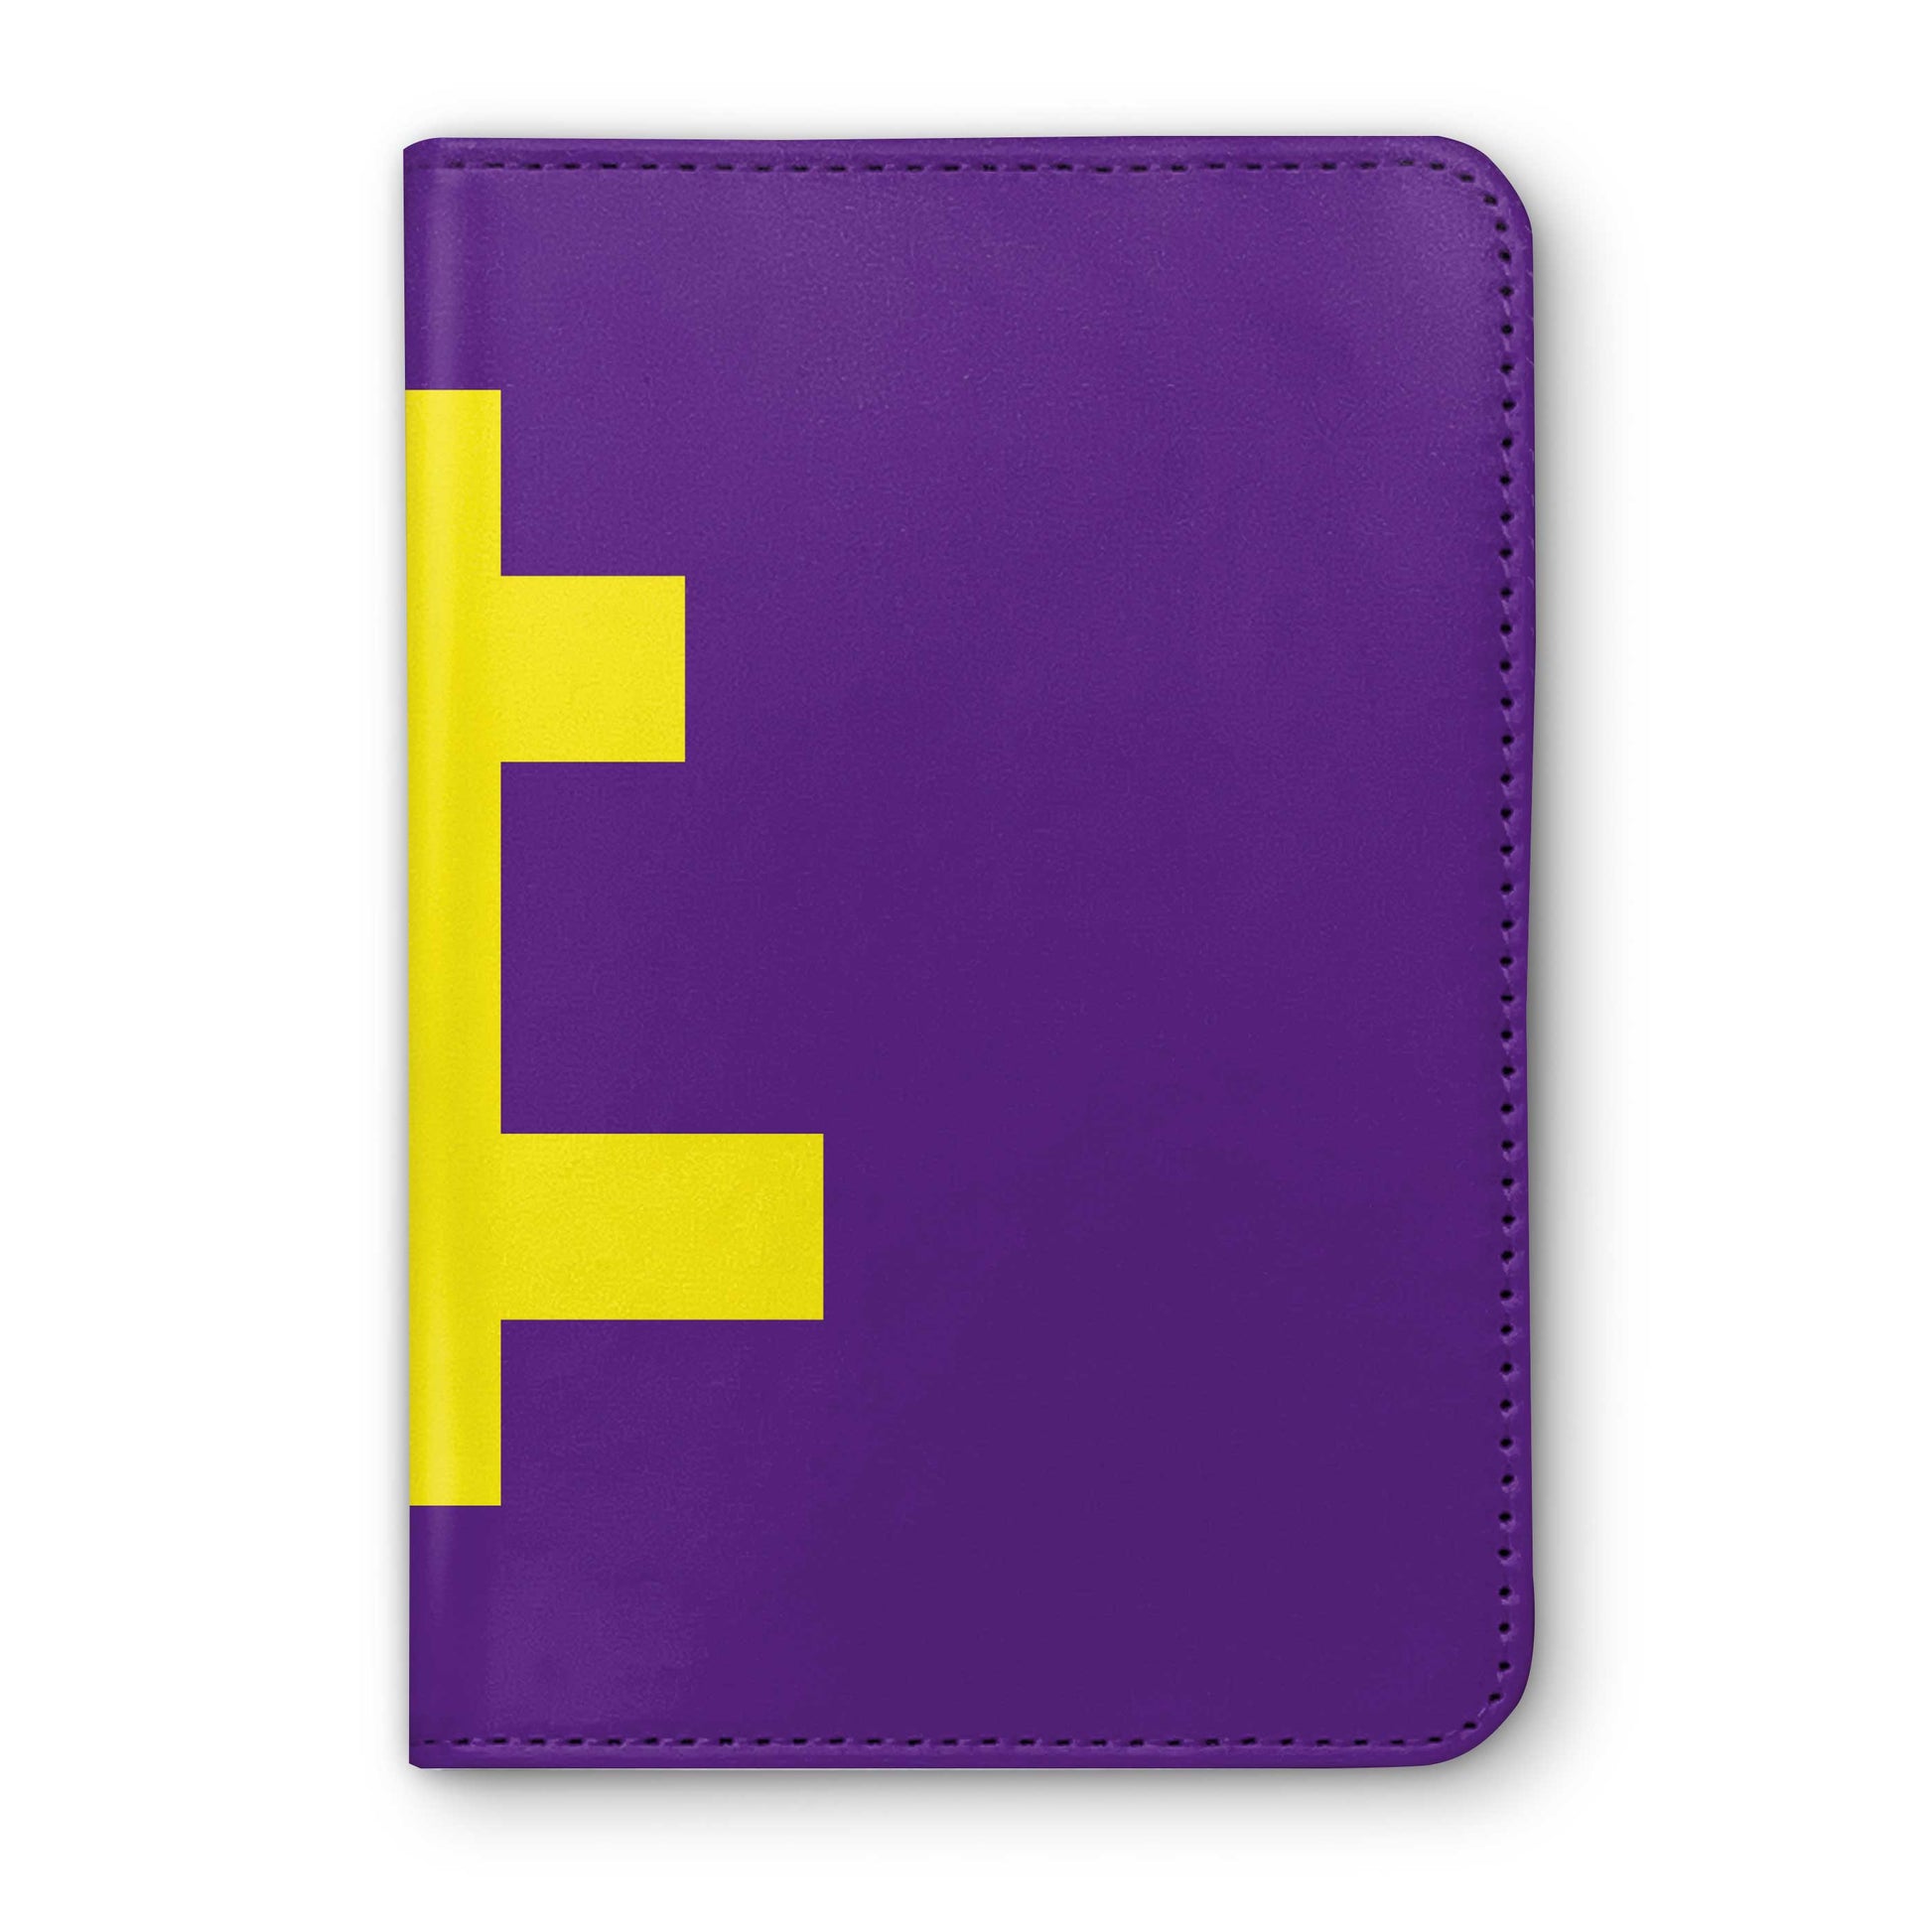 Dr R Lambe  Horse Racing Passport Holder - Hacked Up Horse Racing Gifts